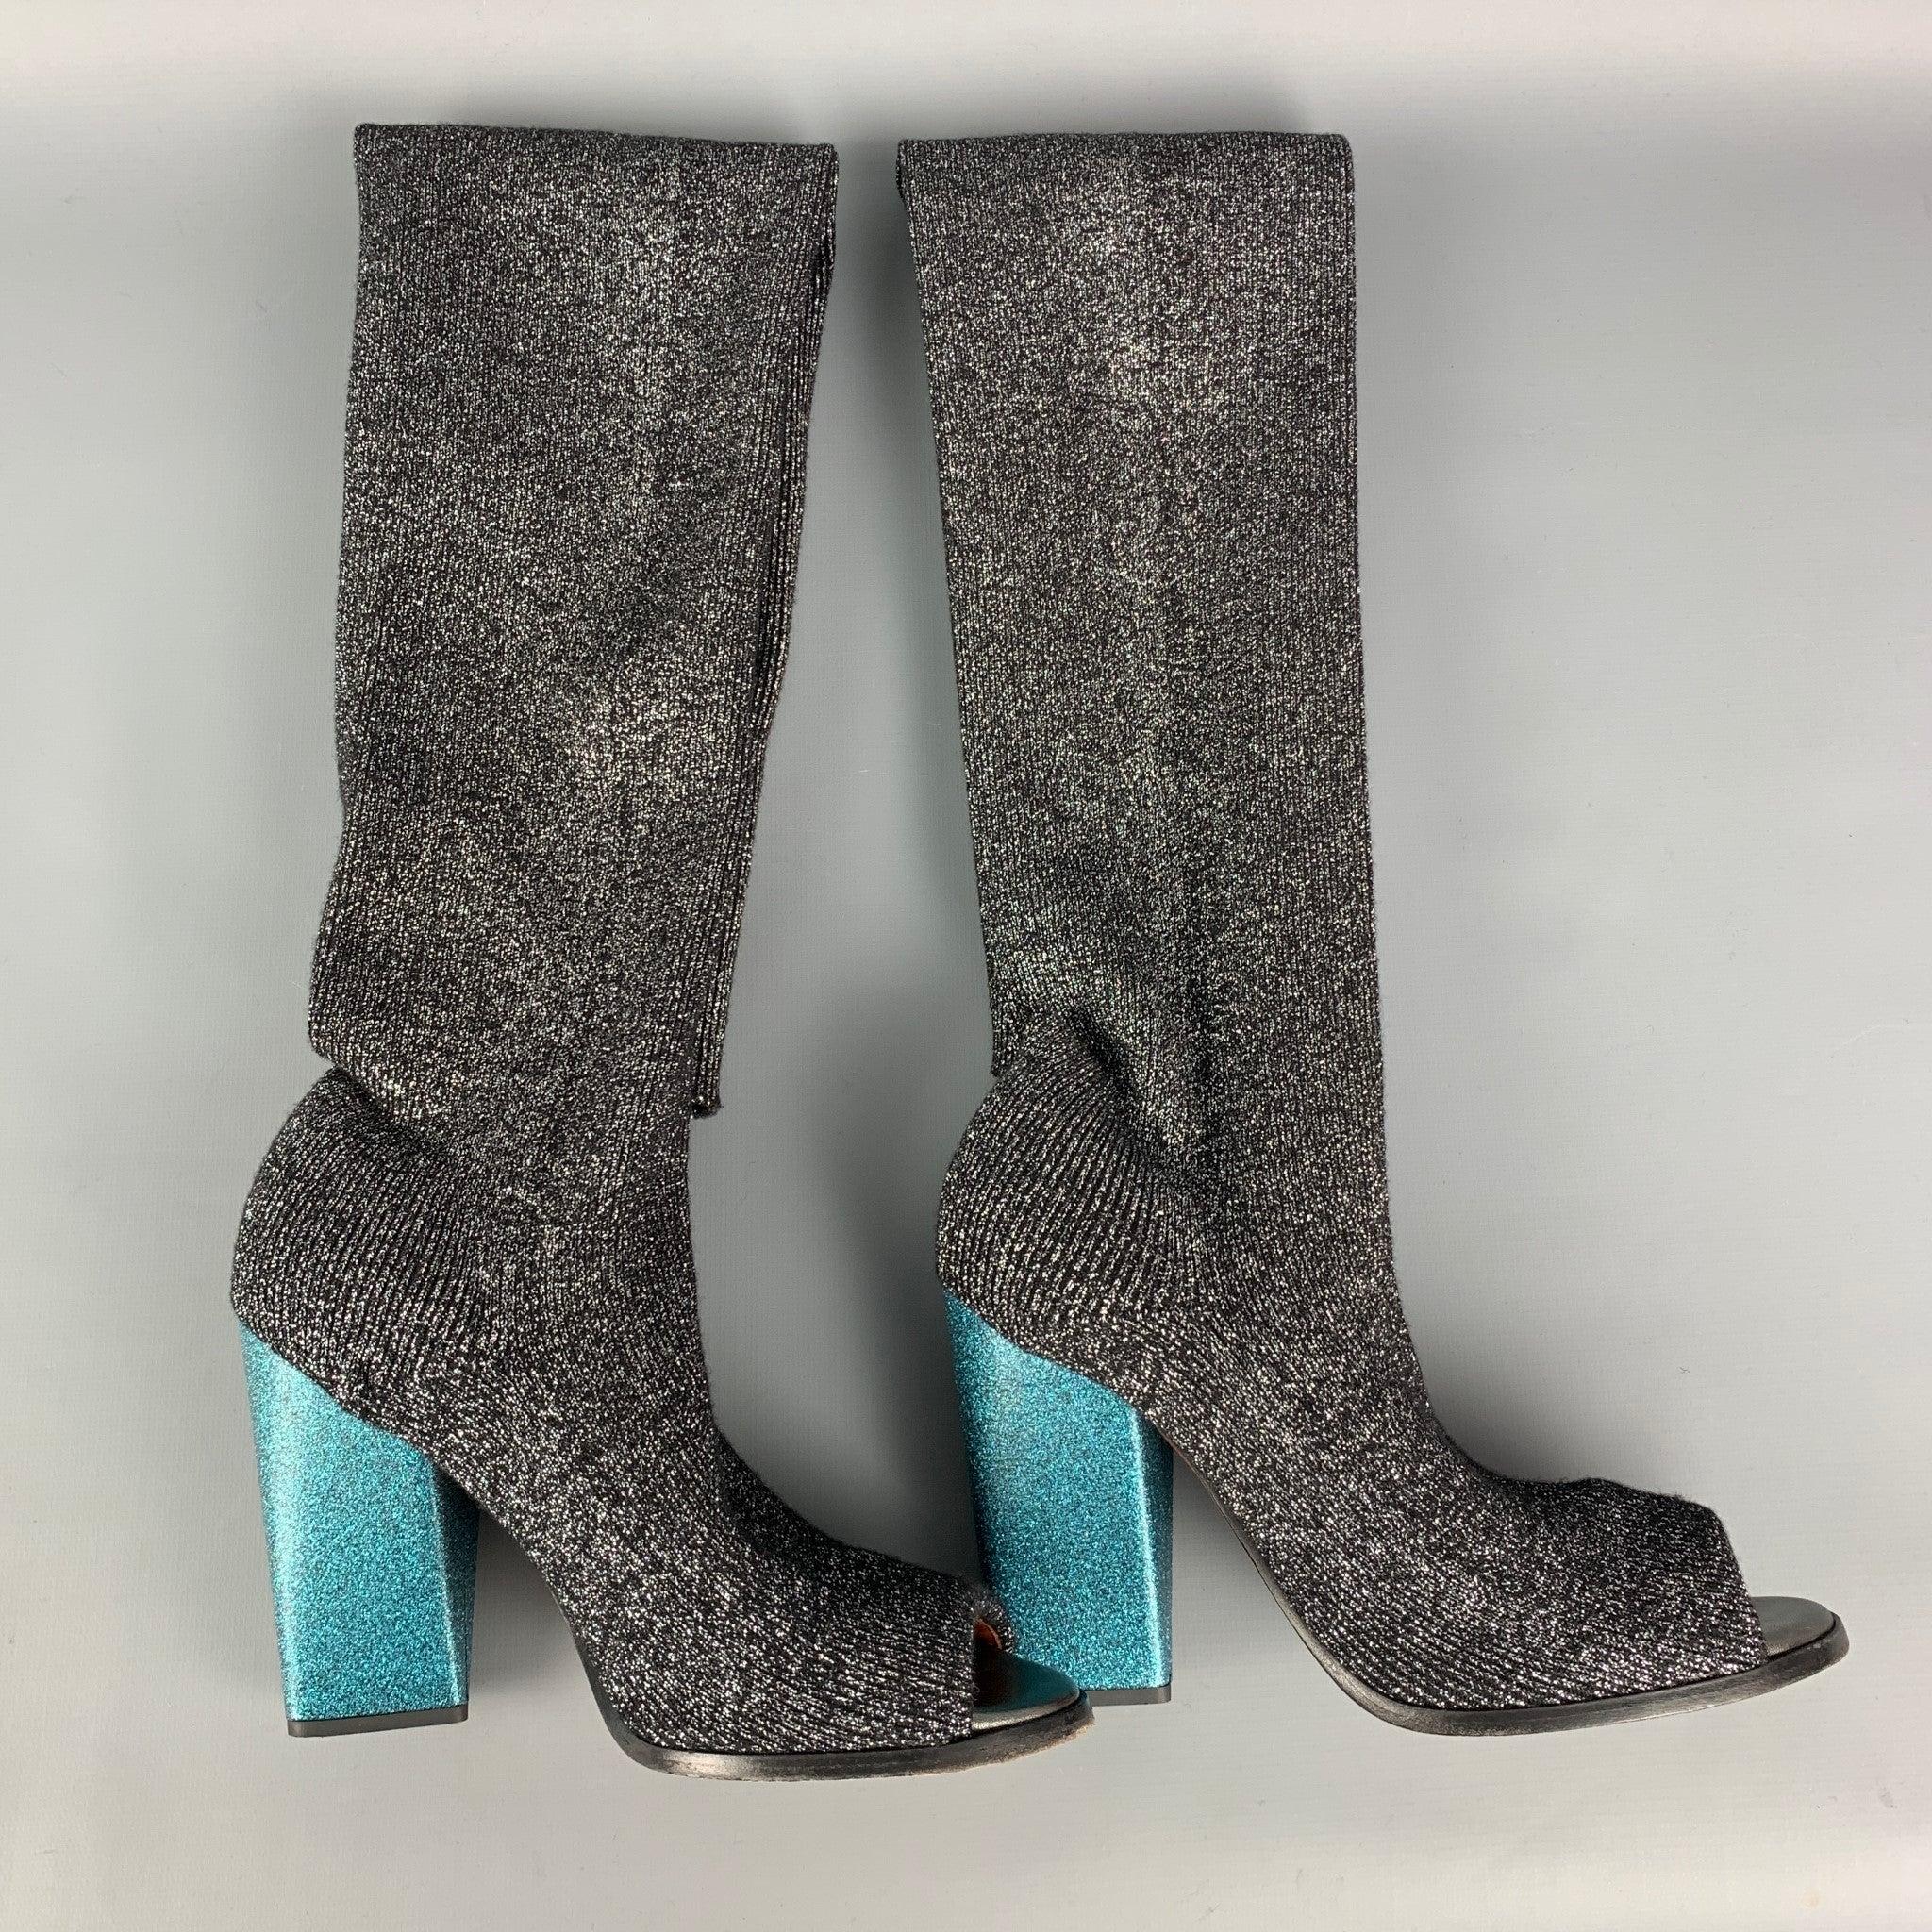 MISSONI thigh high boots comes in black & silver metallic lurex featuring a pull on style, open toe, and a chunky heel. Made in Italy.
New With Box.
 

Marked:   37 

Measurements: 
  Length: 8 inches  Width: 3.5 inches  Height: 25 inches 
  
  
